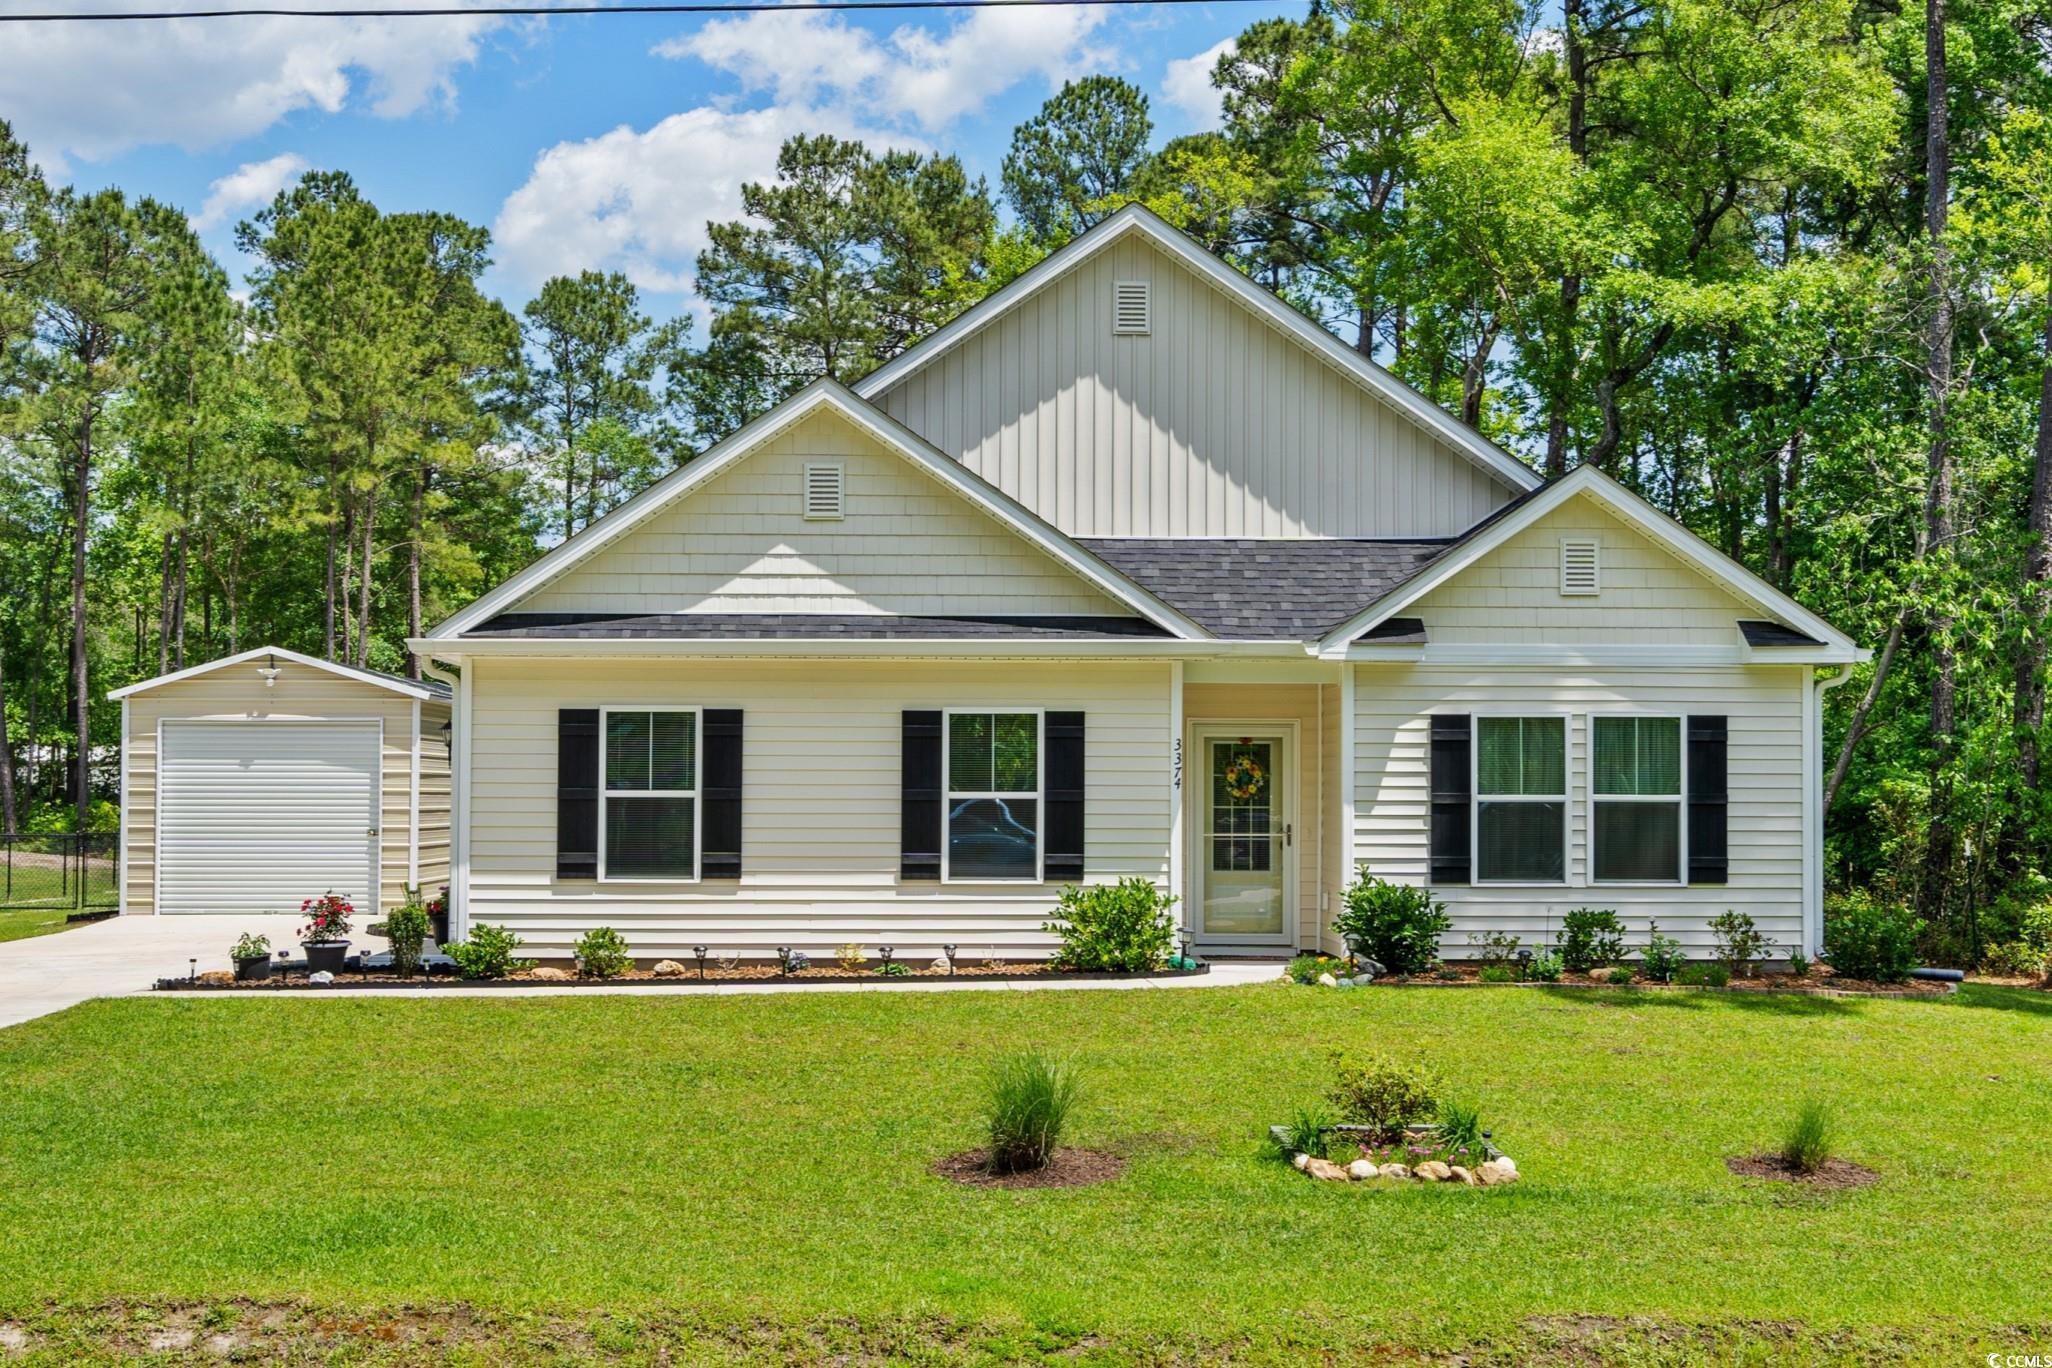 Photo one of 3374 Cypress Dr. Little River SC 29566 | MLS 2410261